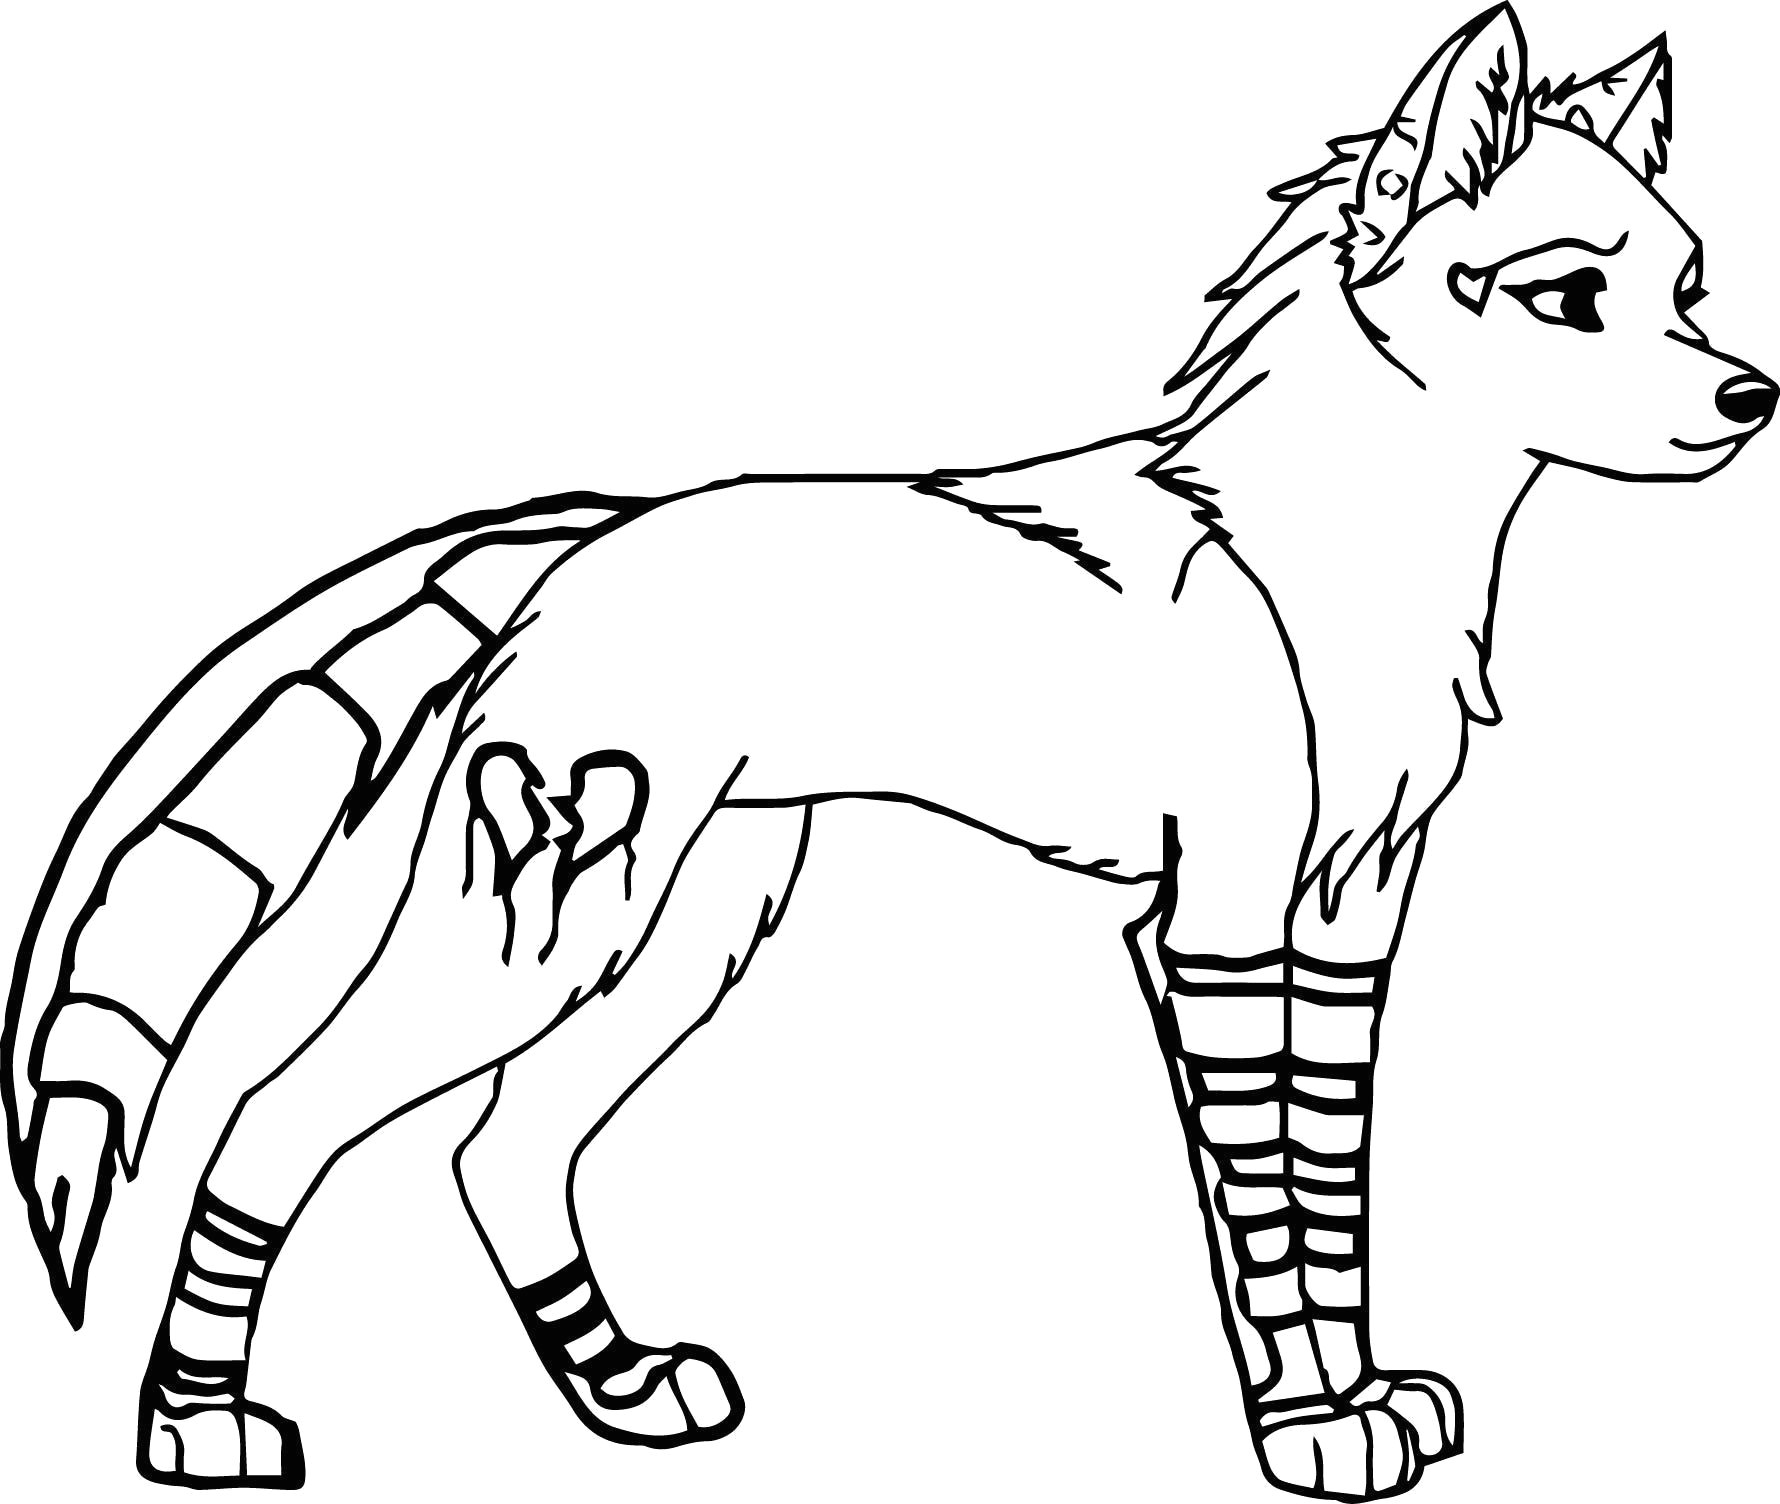 Drawing Of A Dog Black and White Fresh Black and White Wolf Coloring Pages Nicho Me